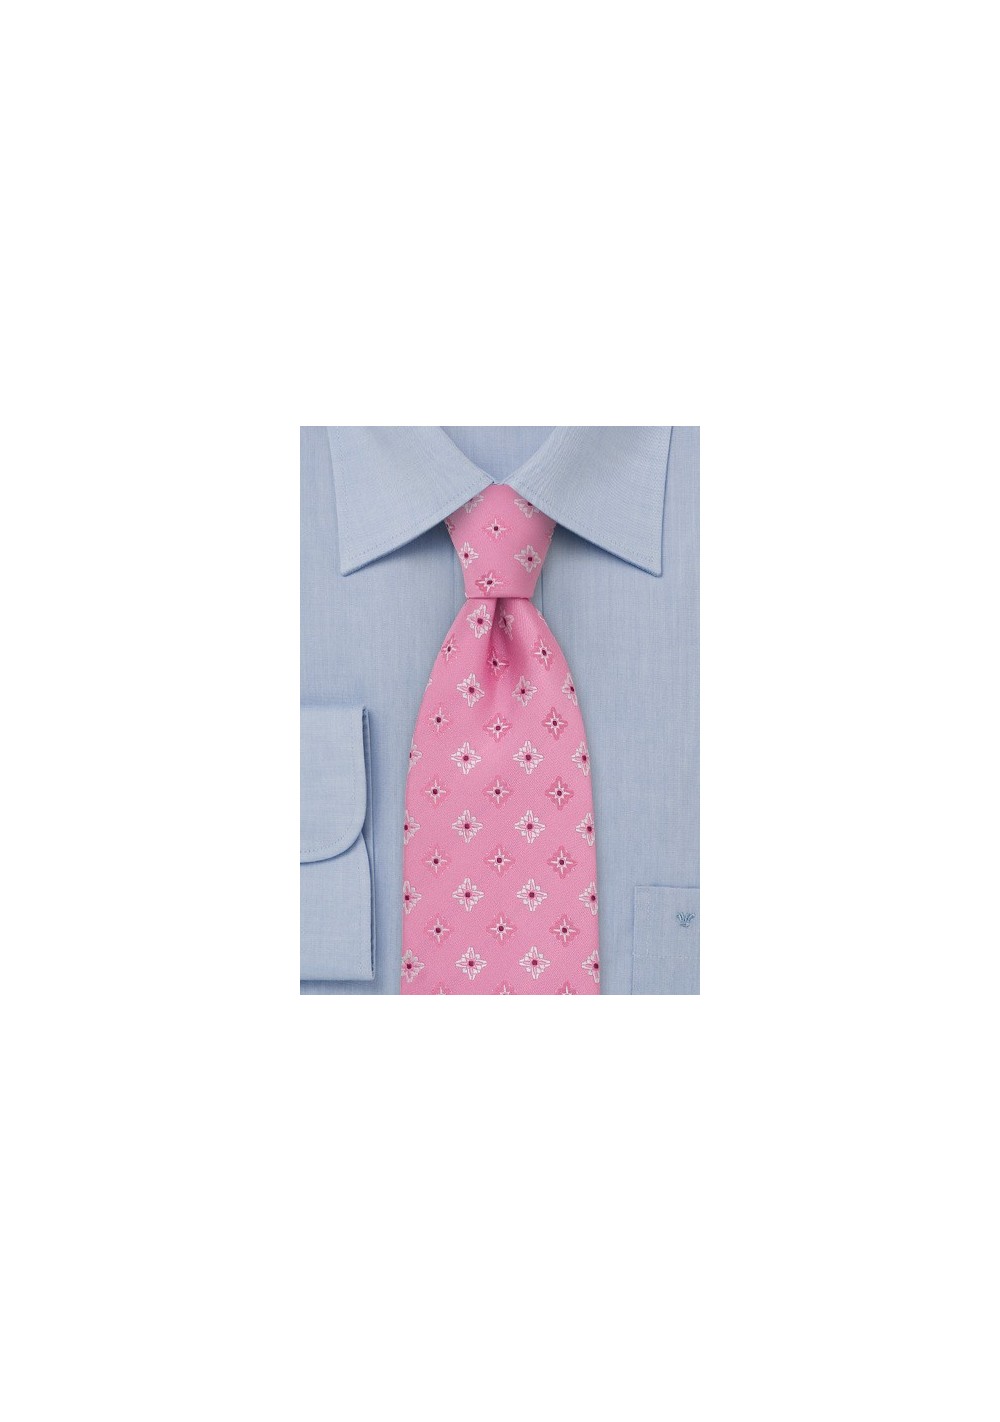 Rose-Pink Floral Tie by Chevalier